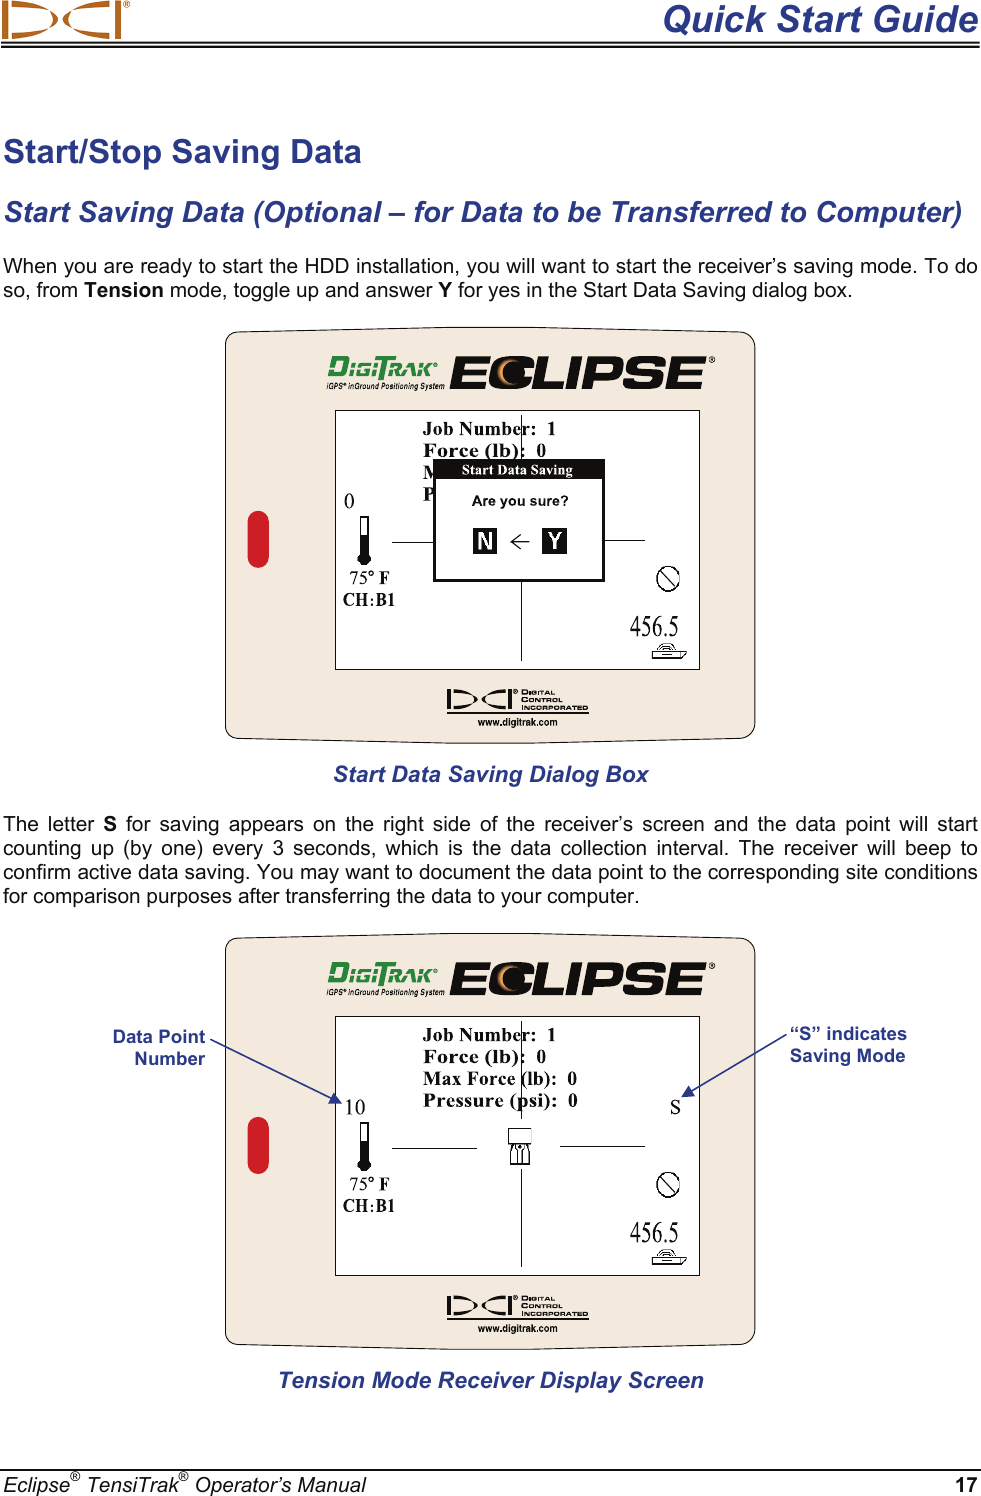  Quick Start Guide Eclipse® TensiTrak® Operator’s Manual 17 Start/Stop Saving Data Start Saving Data (Optional – for Data to be Transferred to Computer) When you are ready to start the HDD installation, you will want to start the receiver’s saving mode. To do so, from Tension mode, toggle up and answer Y for yes in the Start Data Saving dialog box.   Start Data Saving Dialog Box The letter S for saving appears on the right side of the receiver’s screen and the data point will start counting up (by one) every 3 seconds, which is the data collection interval. The receiver will beep to confirm active data saving. You may want to document the data point to the corresponding site conditions for comparison purposes after transferring the data to your computer.   Tension Mode Receiver Display Screen “S” indicates Saving Mode Data Point Number 